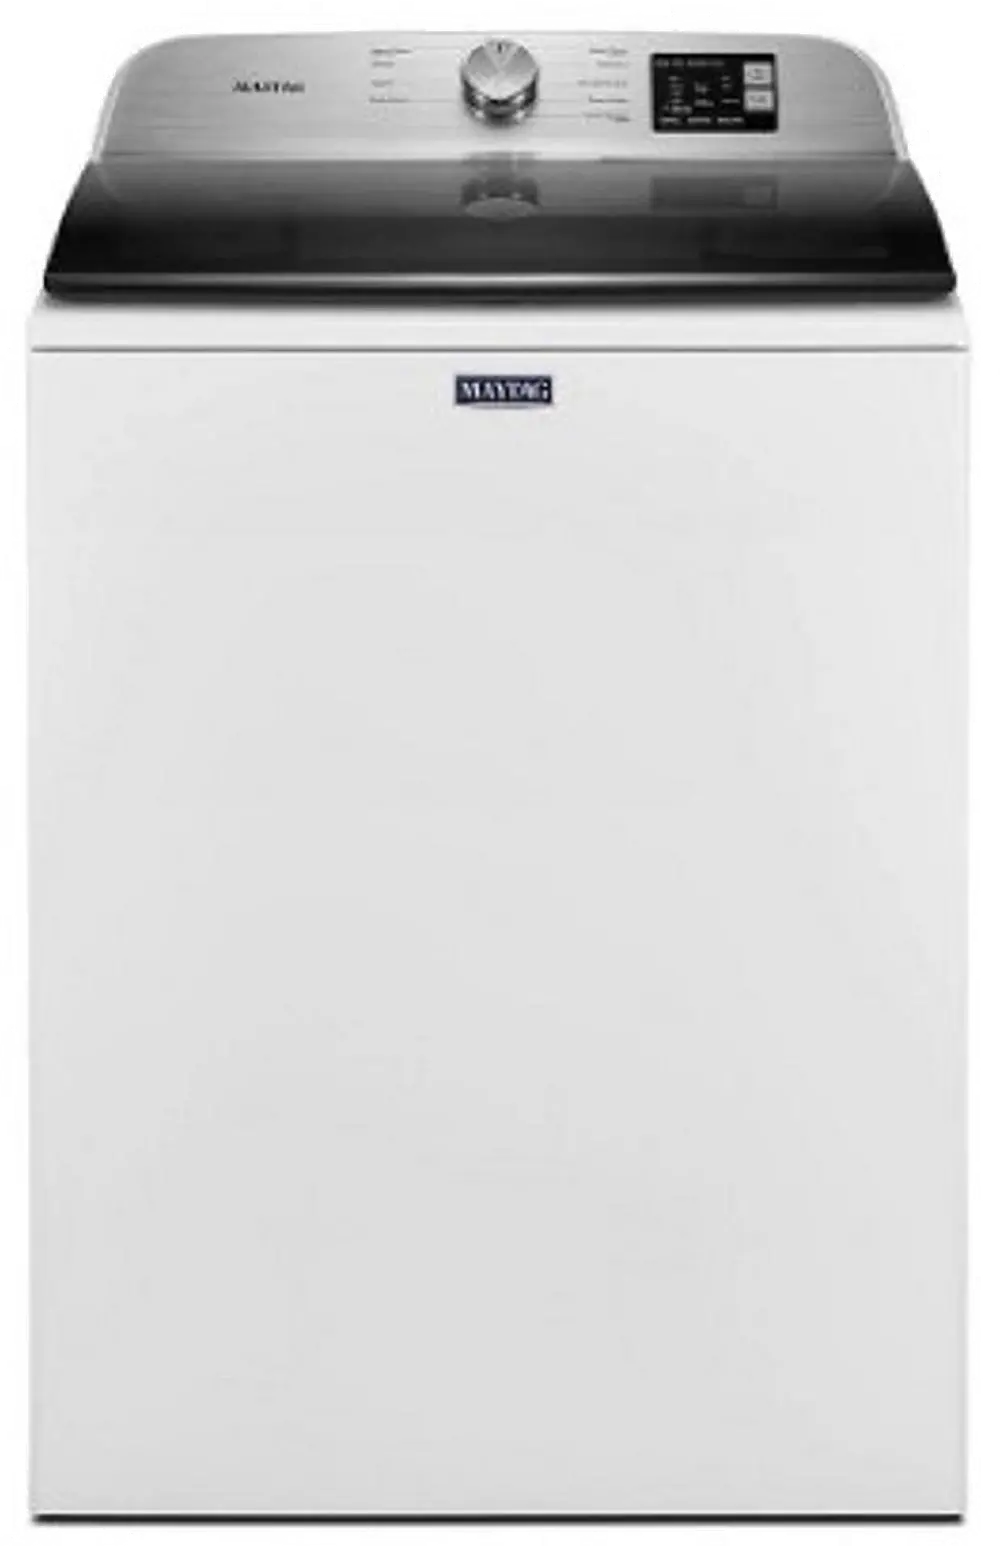 MVW6200KW Maytag High Efficiency Top Load Washer with Deep Fill Option - White 4.8 cu.ft.-1